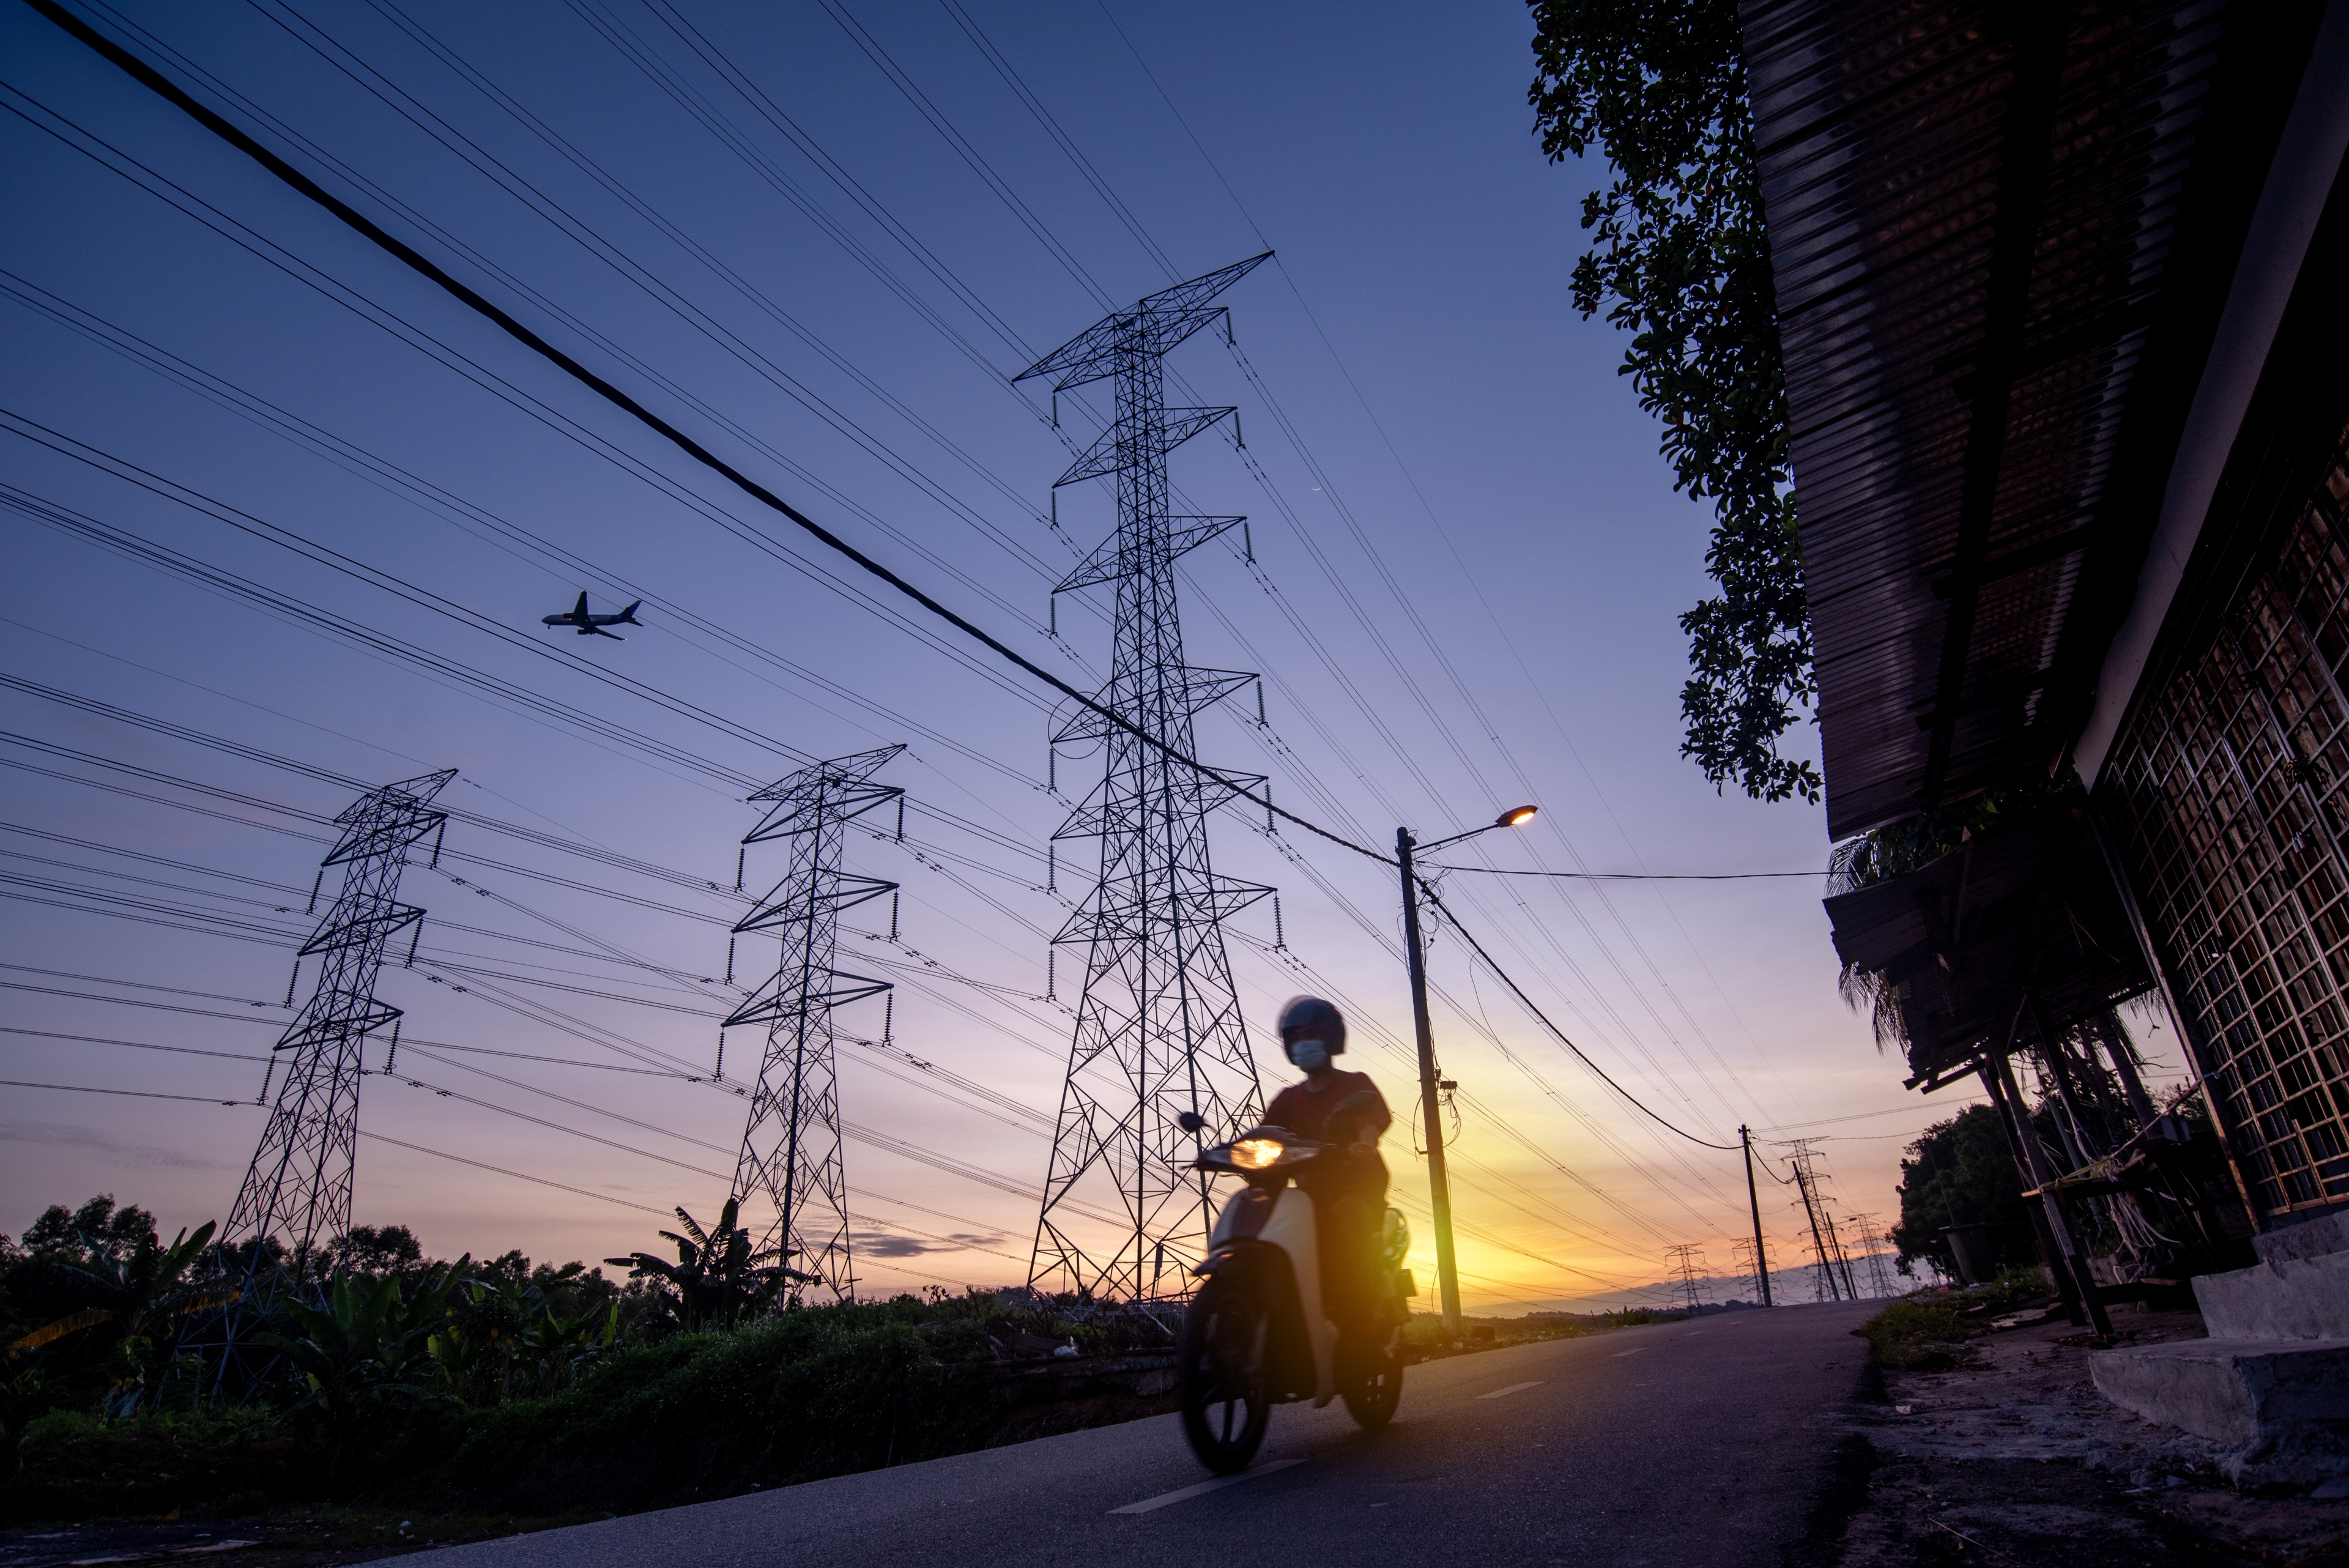 Electricity pylons at night with man on a motor scooter driving down the road to the backdrop of a sunset.